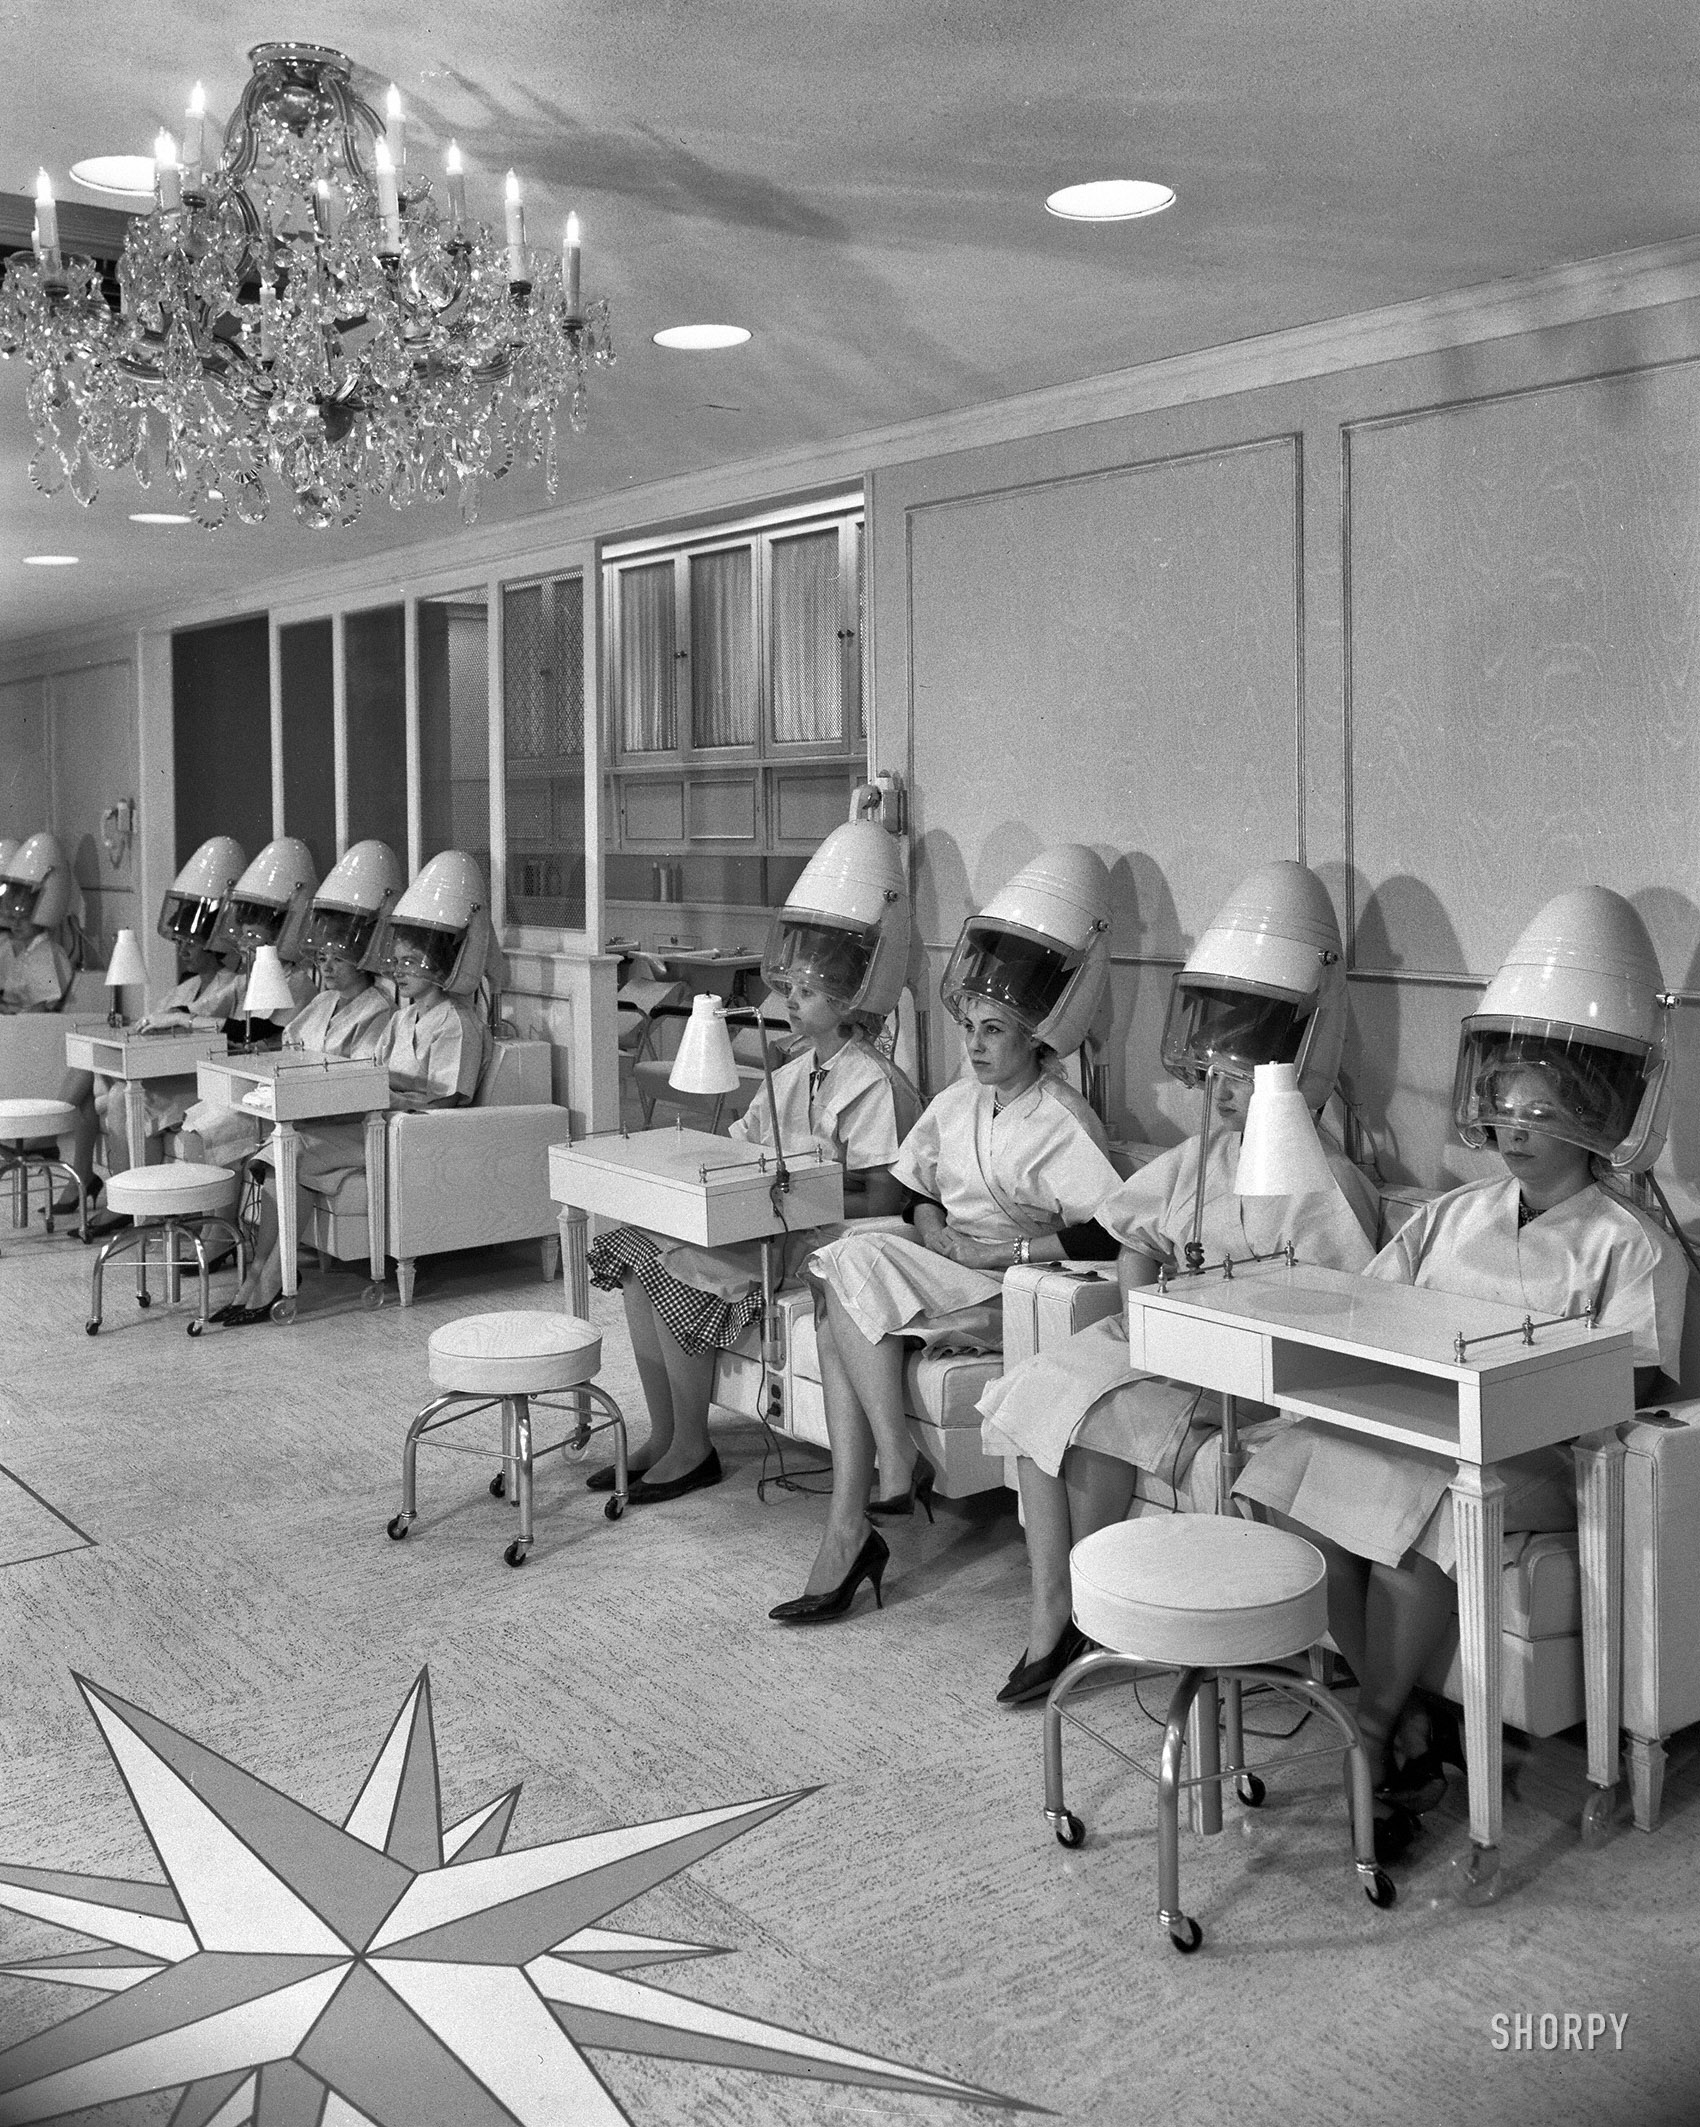 Sept. 18, 1961. New York. "Helena Rubinstein, 655 Fifth Avenue. Hair dryers." This looks as regimented as anything the Army had to offer, although I do spy one nonconformist wearing flats. Gottscho-Schleisner photo. View full size.